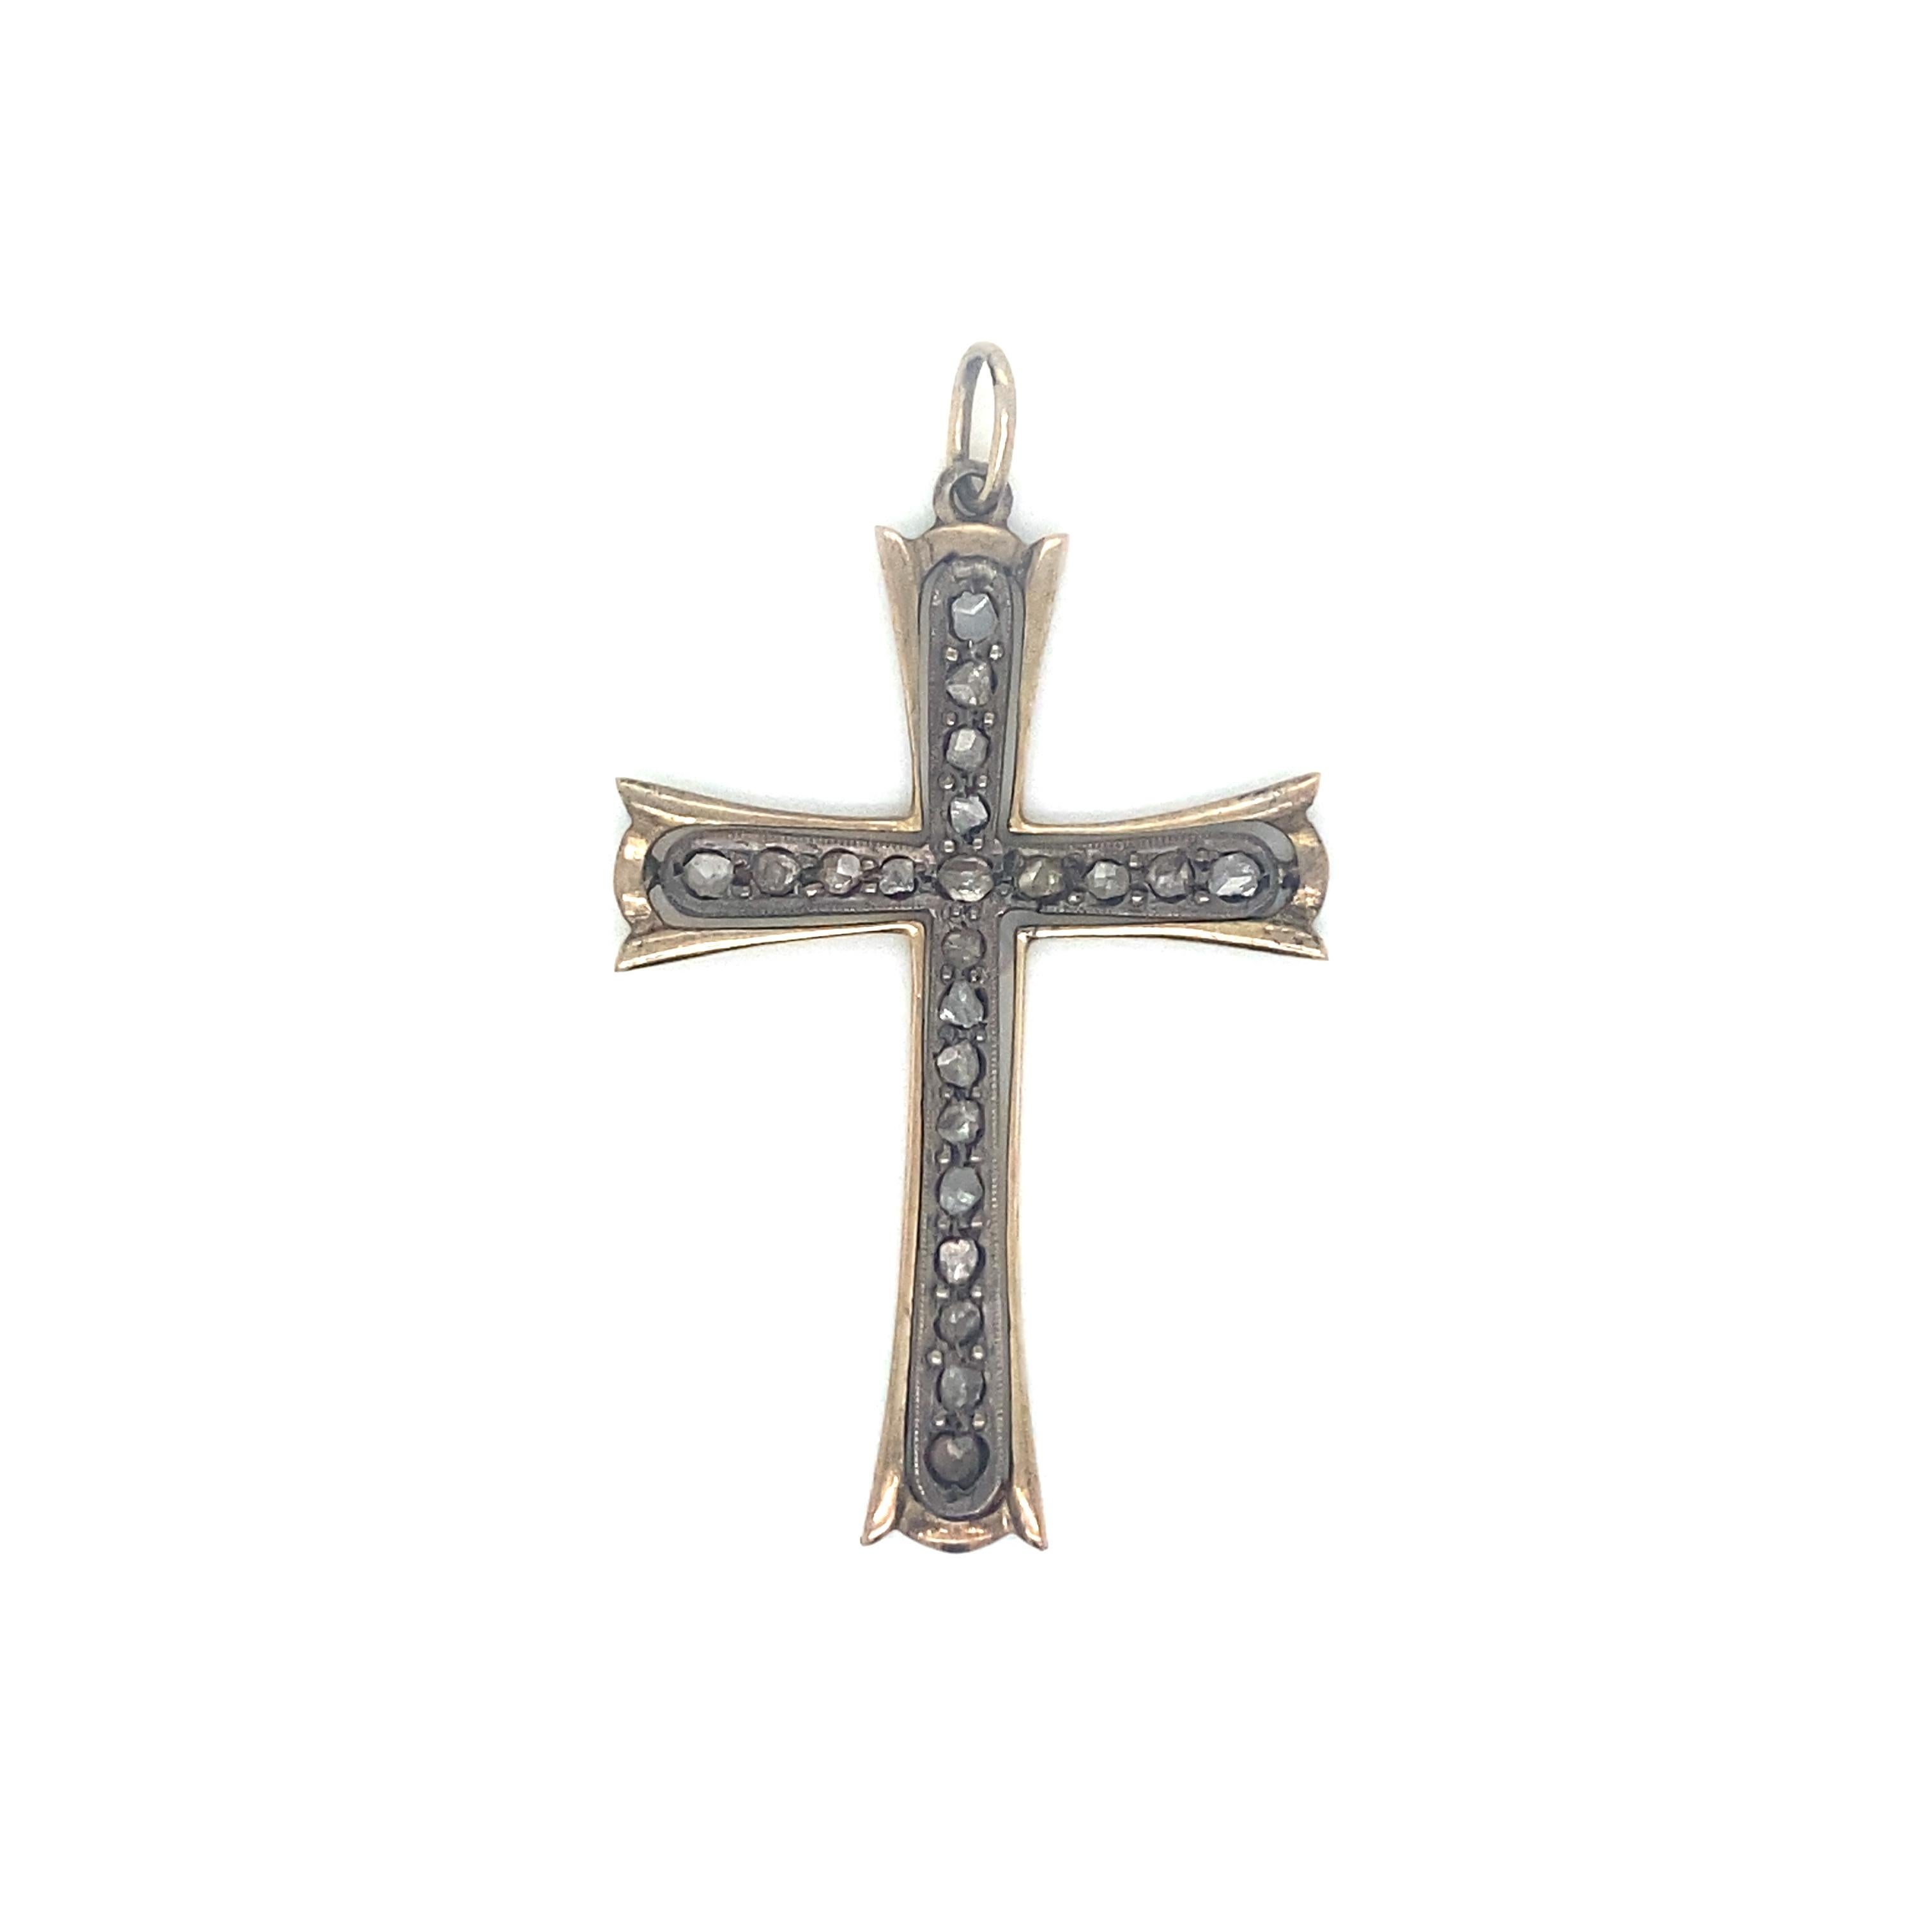 An Antique 12k yellow Gold and silver Cross, it features 24 Rose-cut Diamond, total weight 0,25 carat, beautifully set in shiny prong settings.
circa 1890 in Excellent condition

Measures: long 1,69 inches (4,3 cm) x wide 1,18 in (3 cm) 
Gross